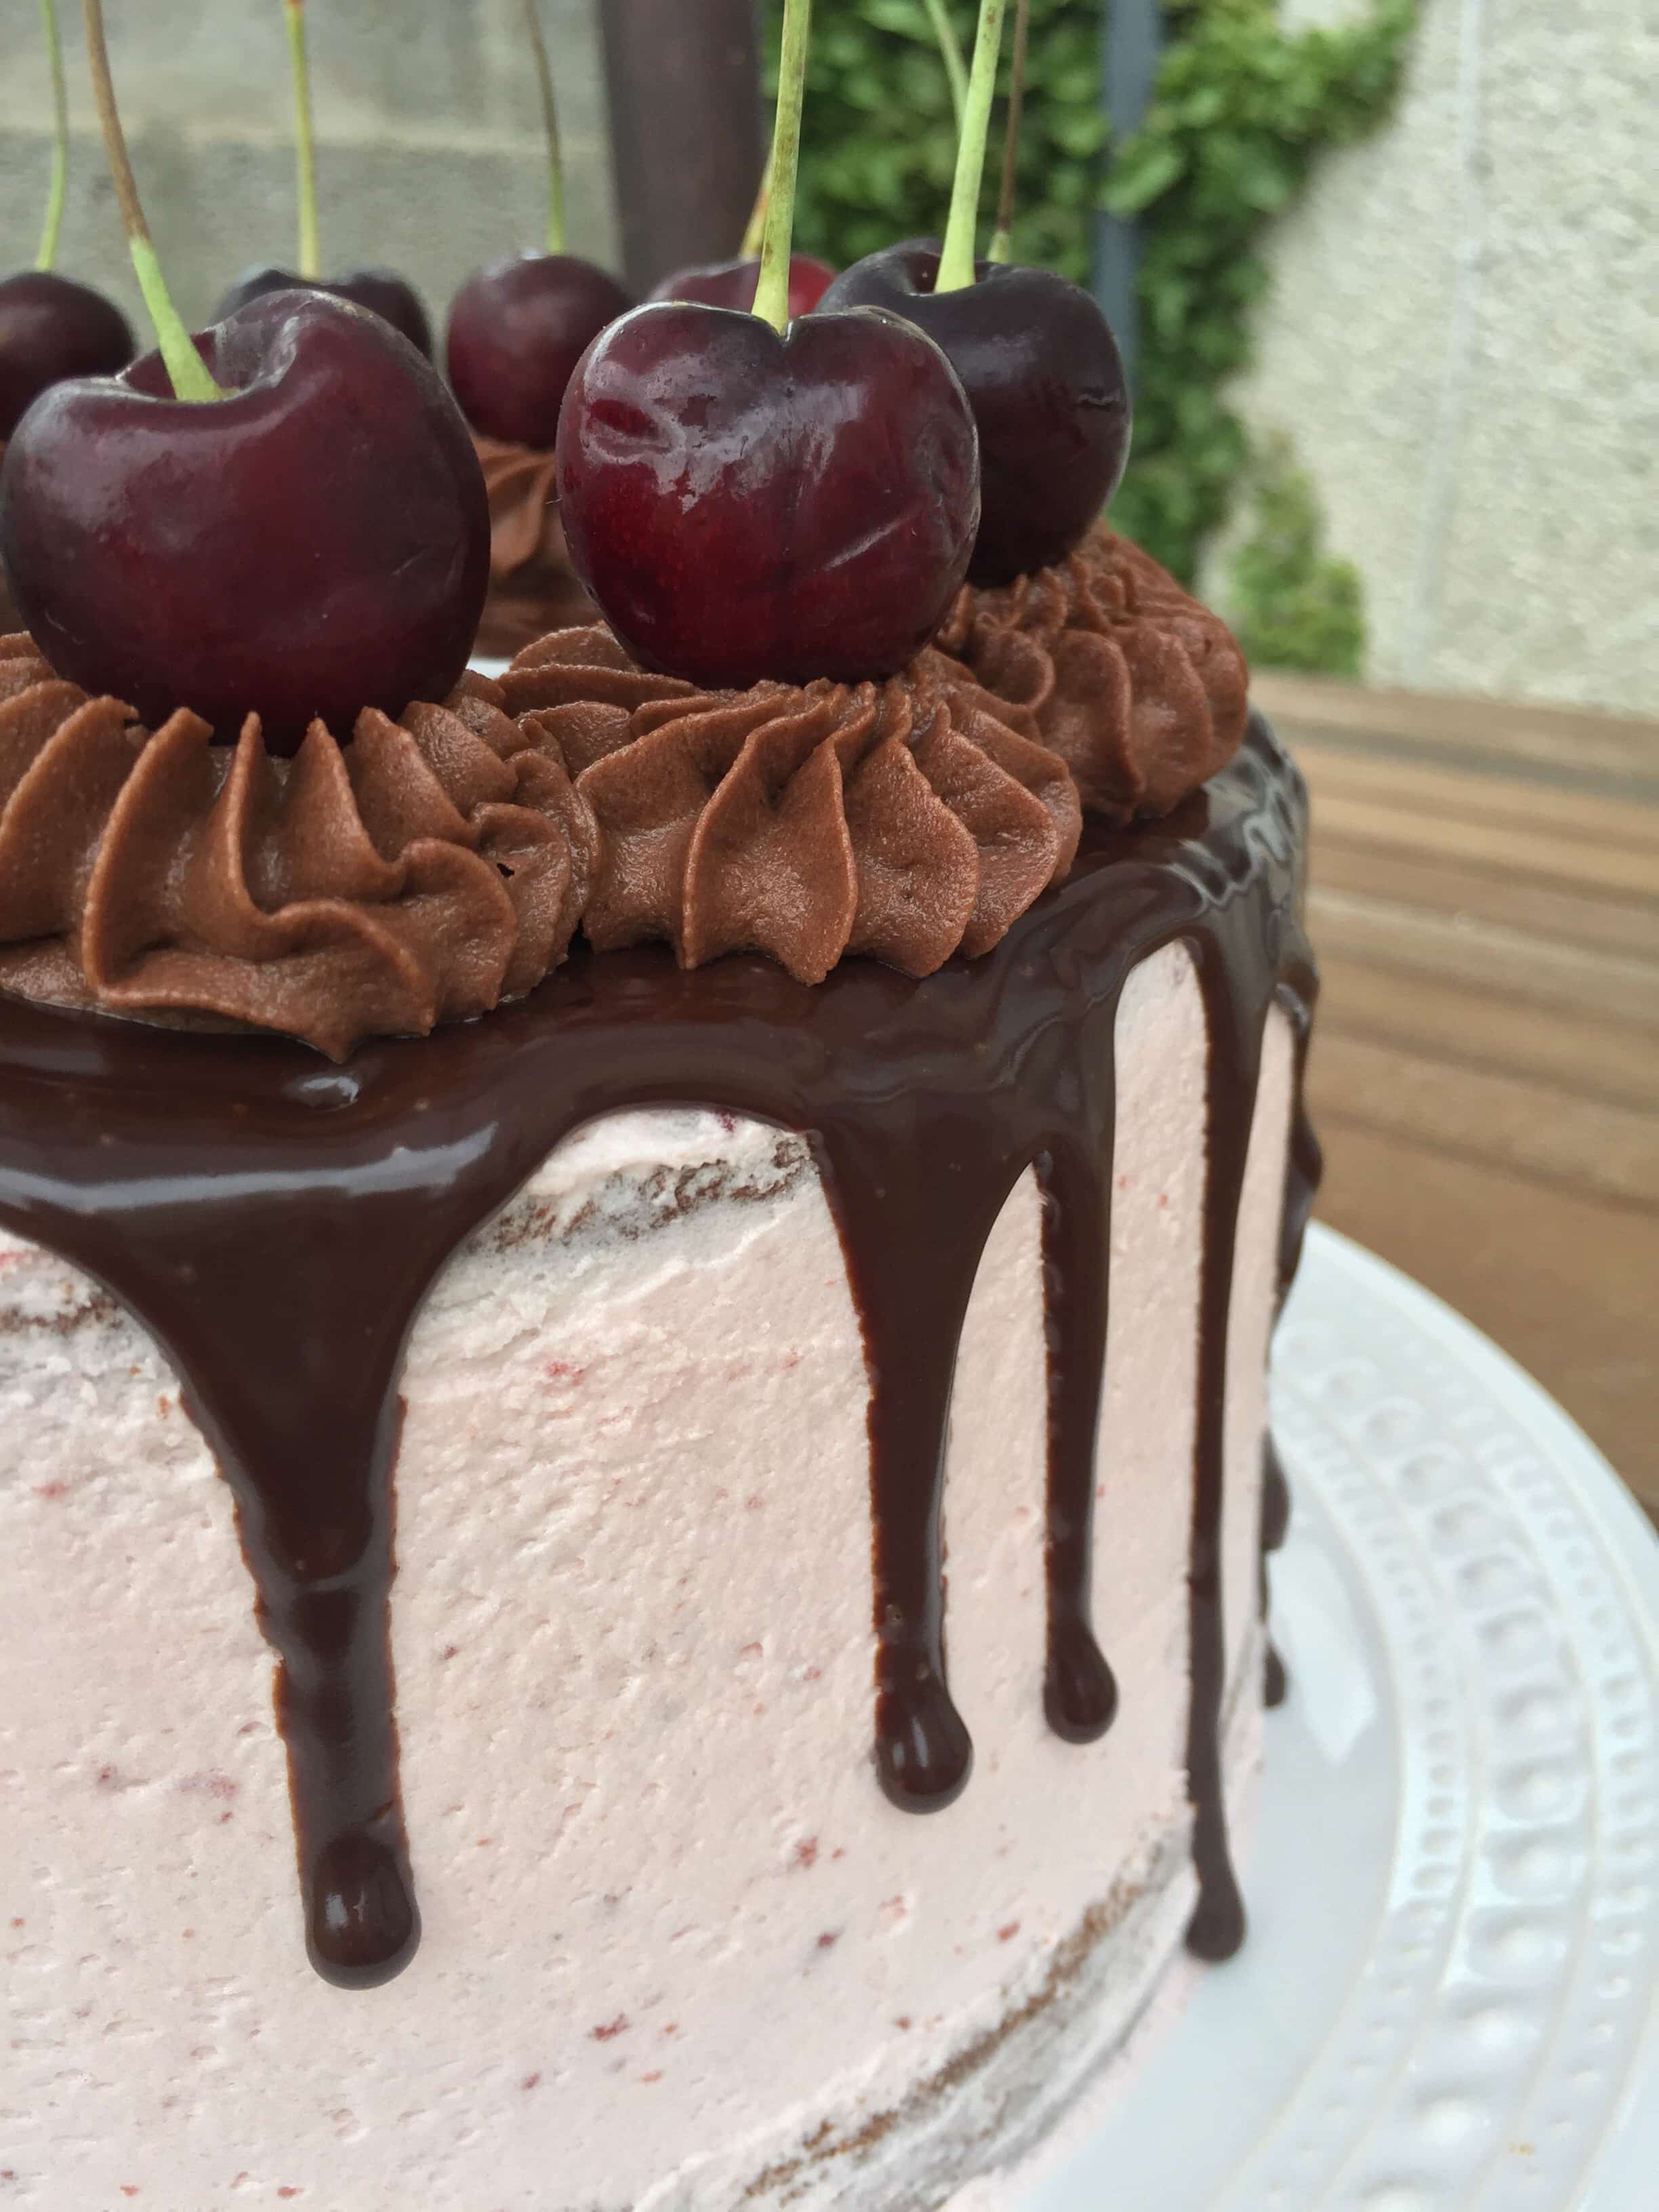 a close up photo of a chocolate cherry cake with a chocolate ganache drip running down the sides and topped with fresh cherries on a wooden table